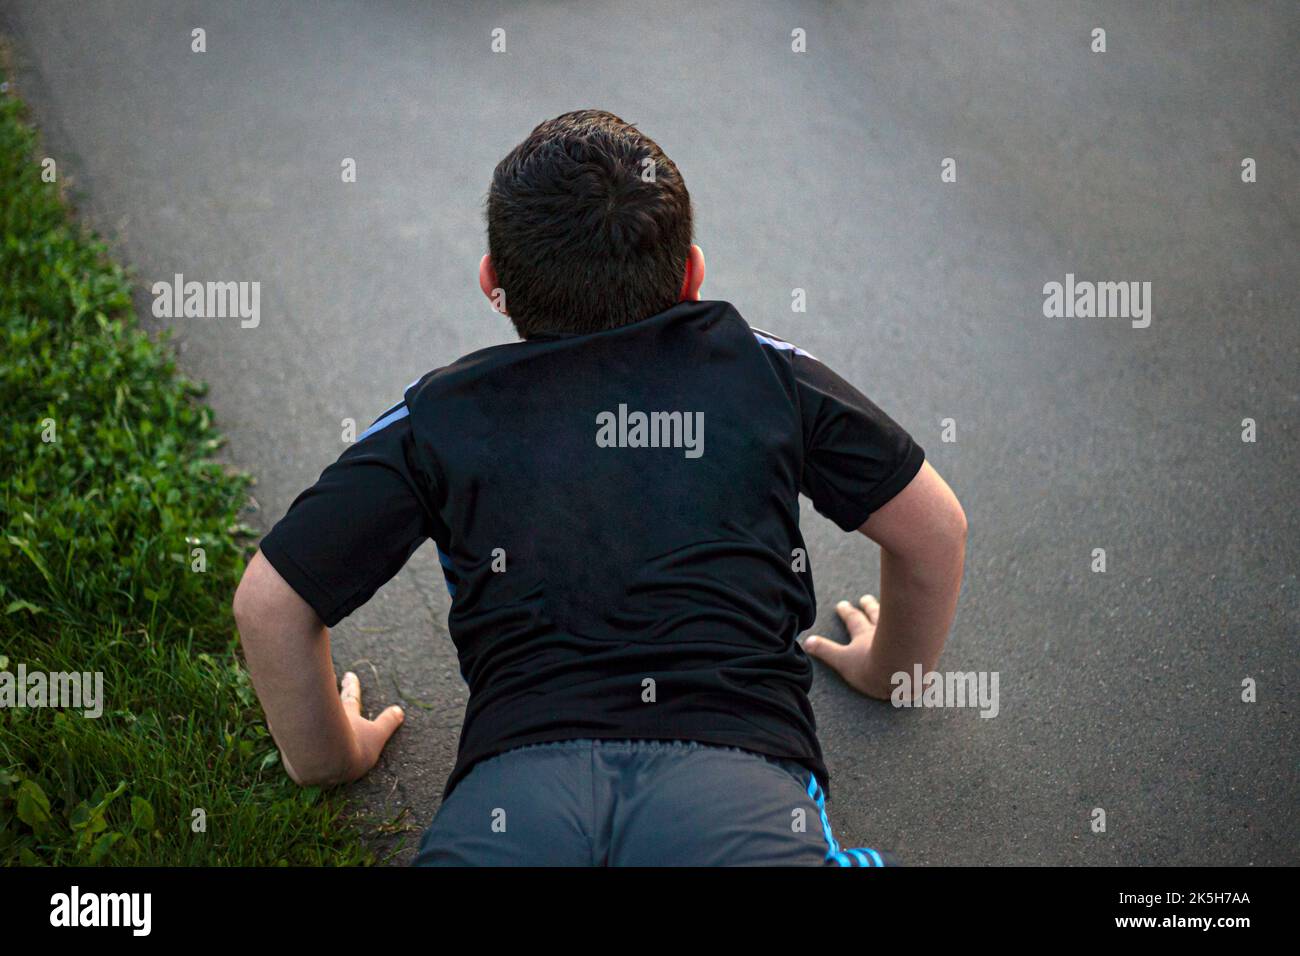 Child does push-ups from ground, Playing sports. Falling on asphalt. Boy is lying down. Stock Photo